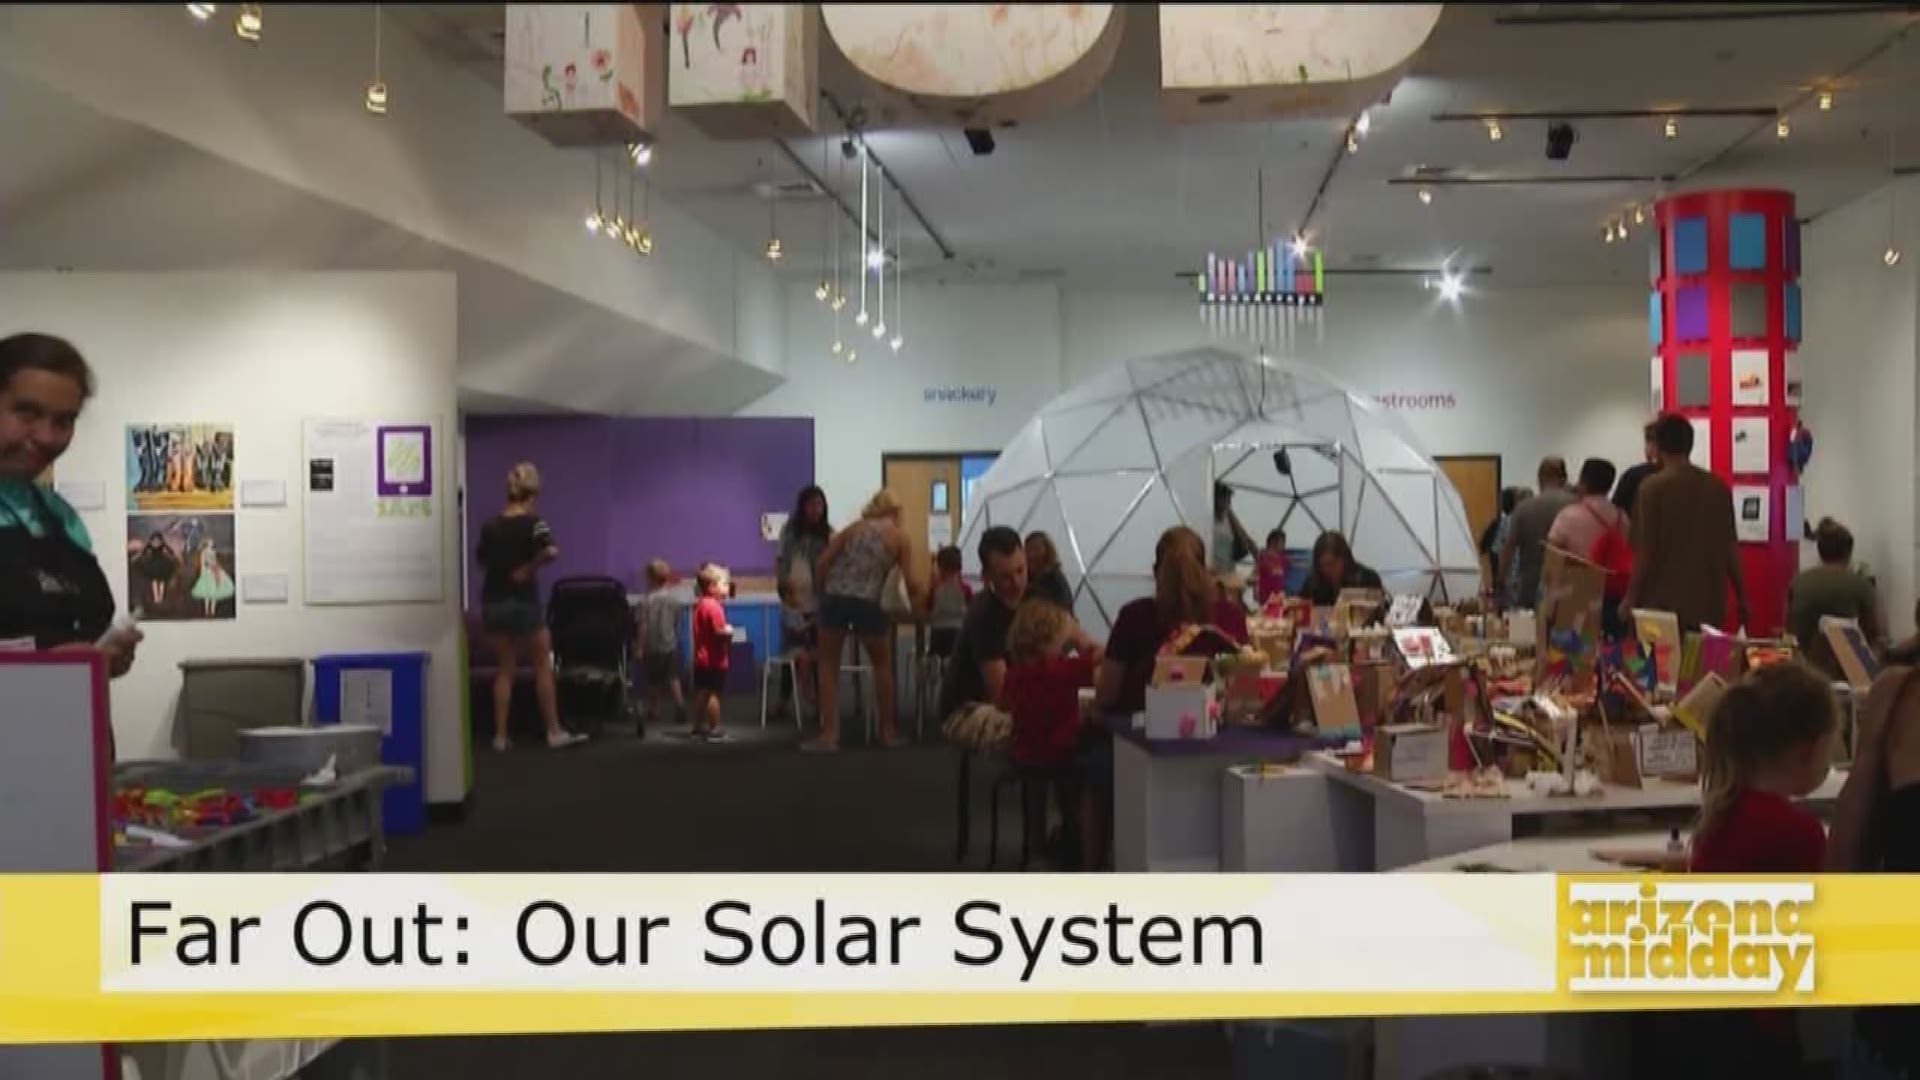 Looking for fun with the family? Yvette with the i.d.e.a. Museum shows us what's in store for the new "Far Out: Our Solar System" Exhibit."